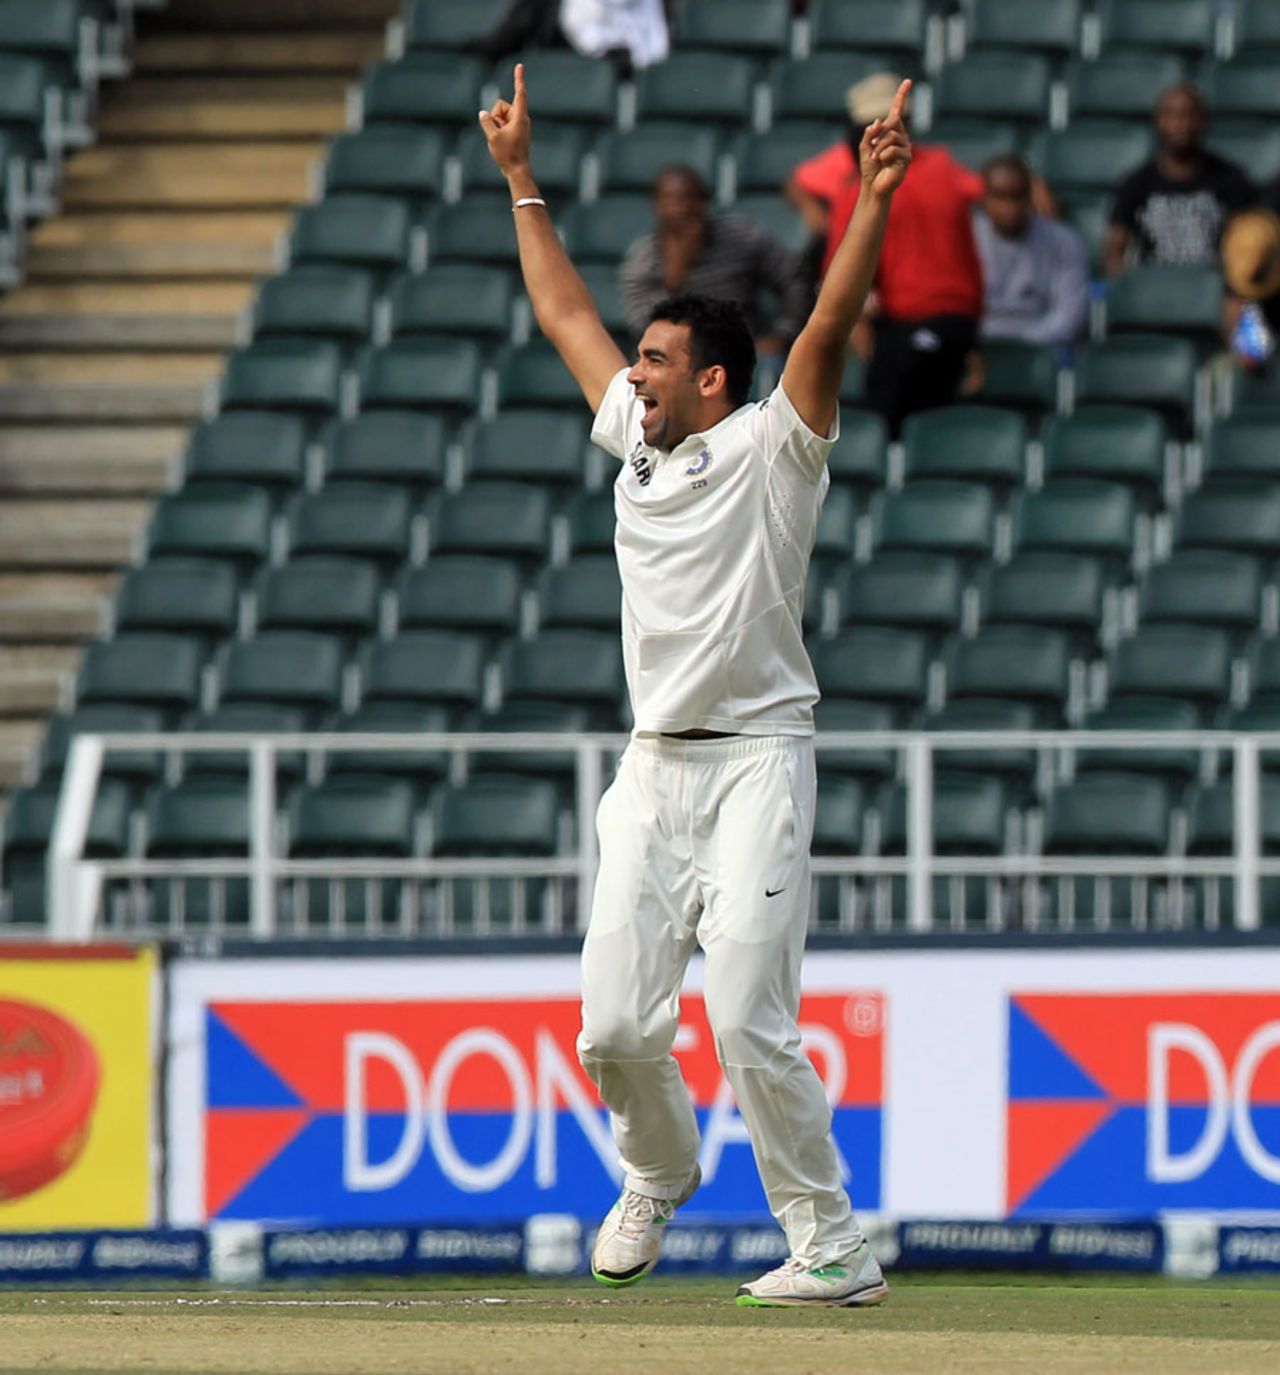 Zaheer Khan picked up the crucial wicket of Graeme Smith, South Africa v India, 1st Test, Johannesburg, 2nd day, December 19, 2013